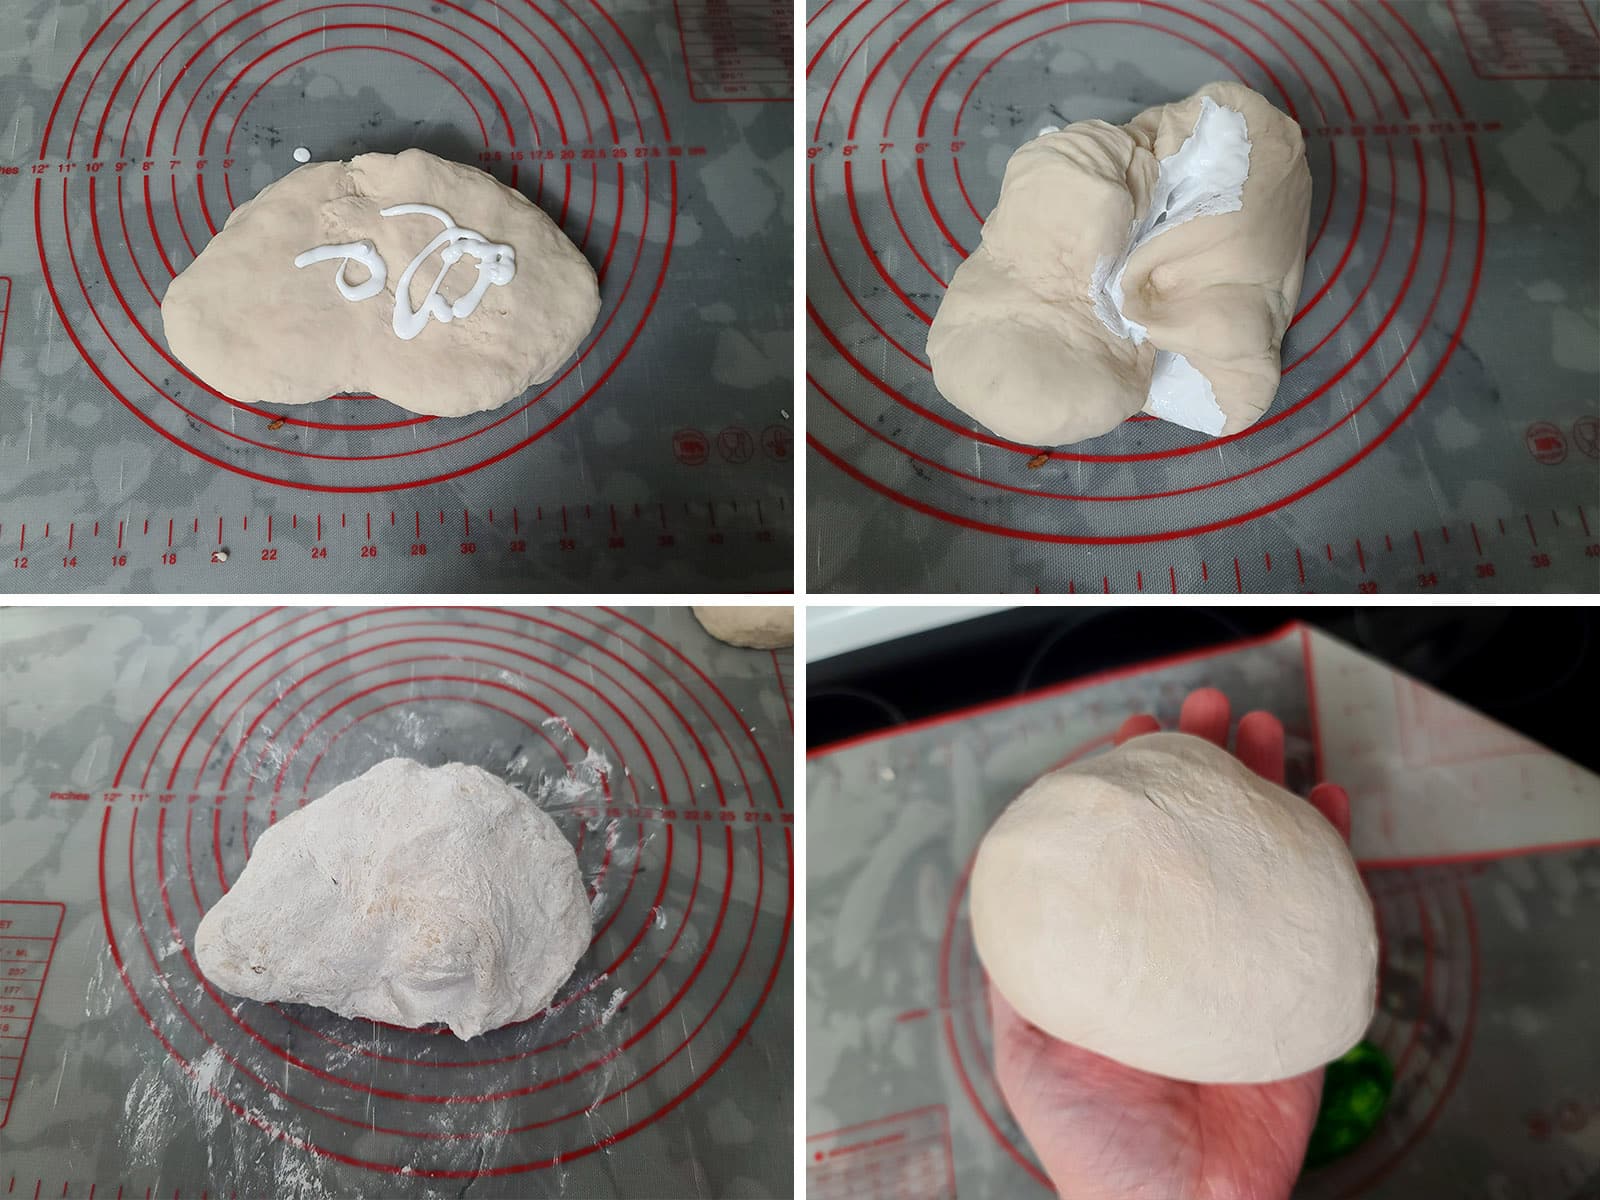 A 4 part image showing white food colouring being kneaded into a ball of dough.